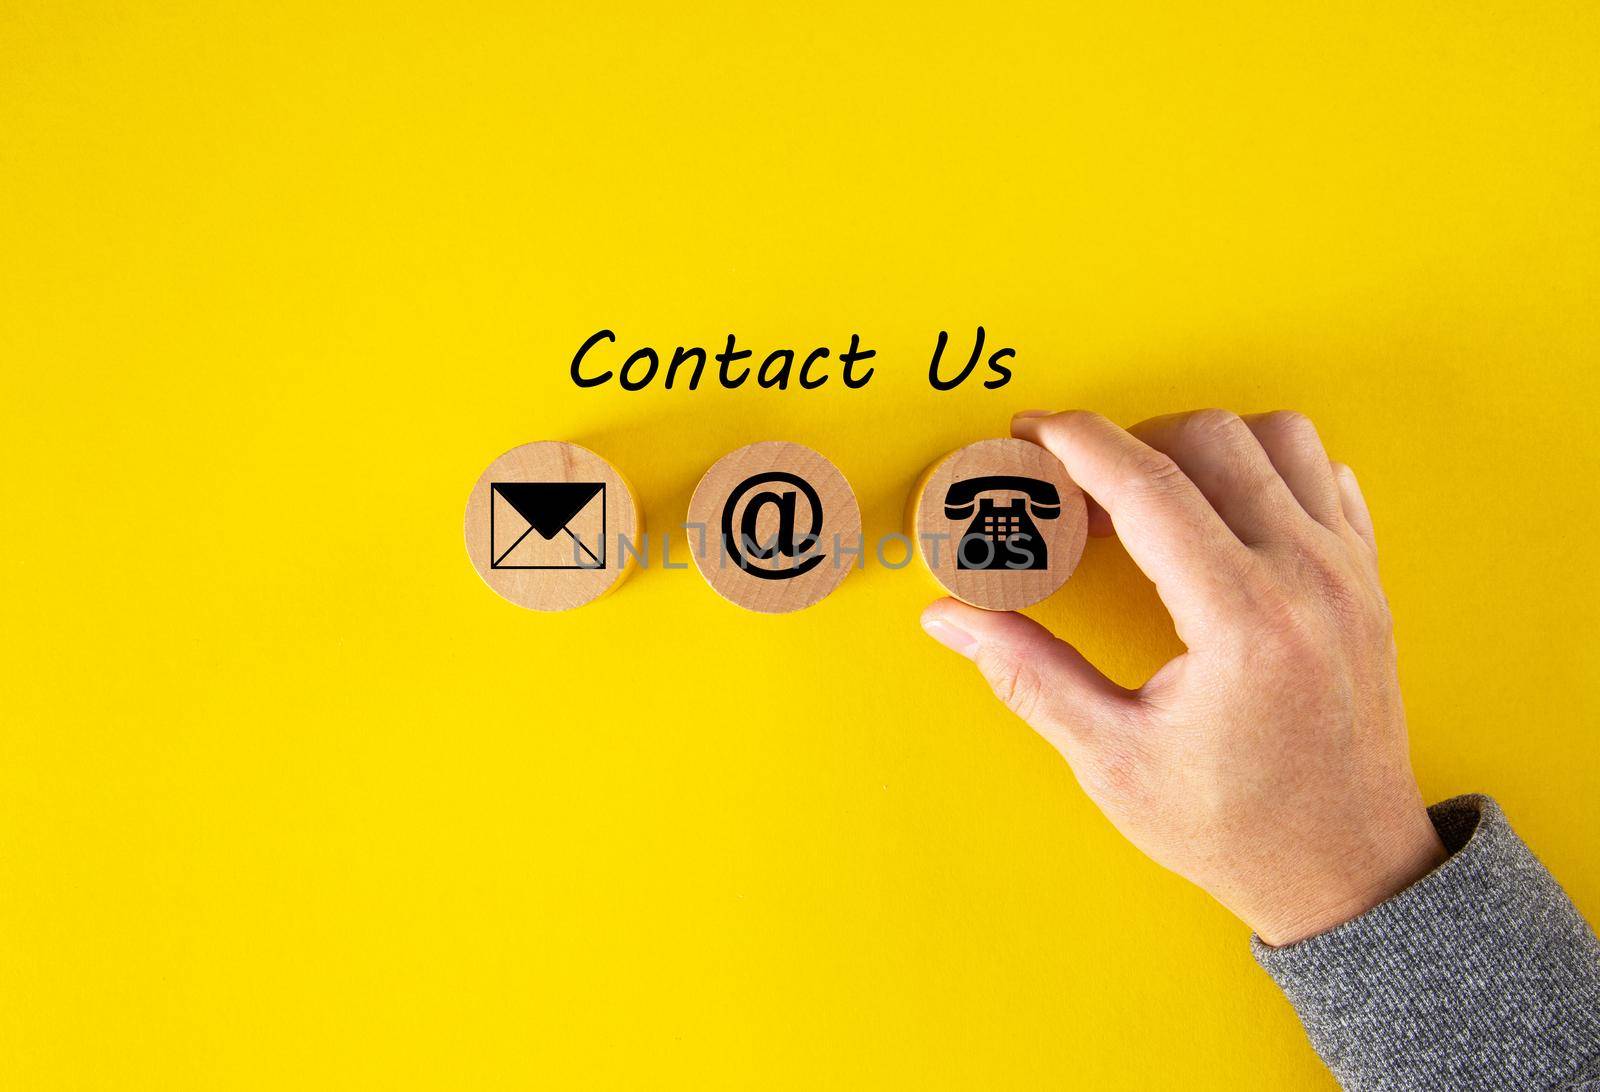 Contact Us, Customer support concept. Wooden cubes with mail, phone and email icons on table, yellow background. by tehcheesiong